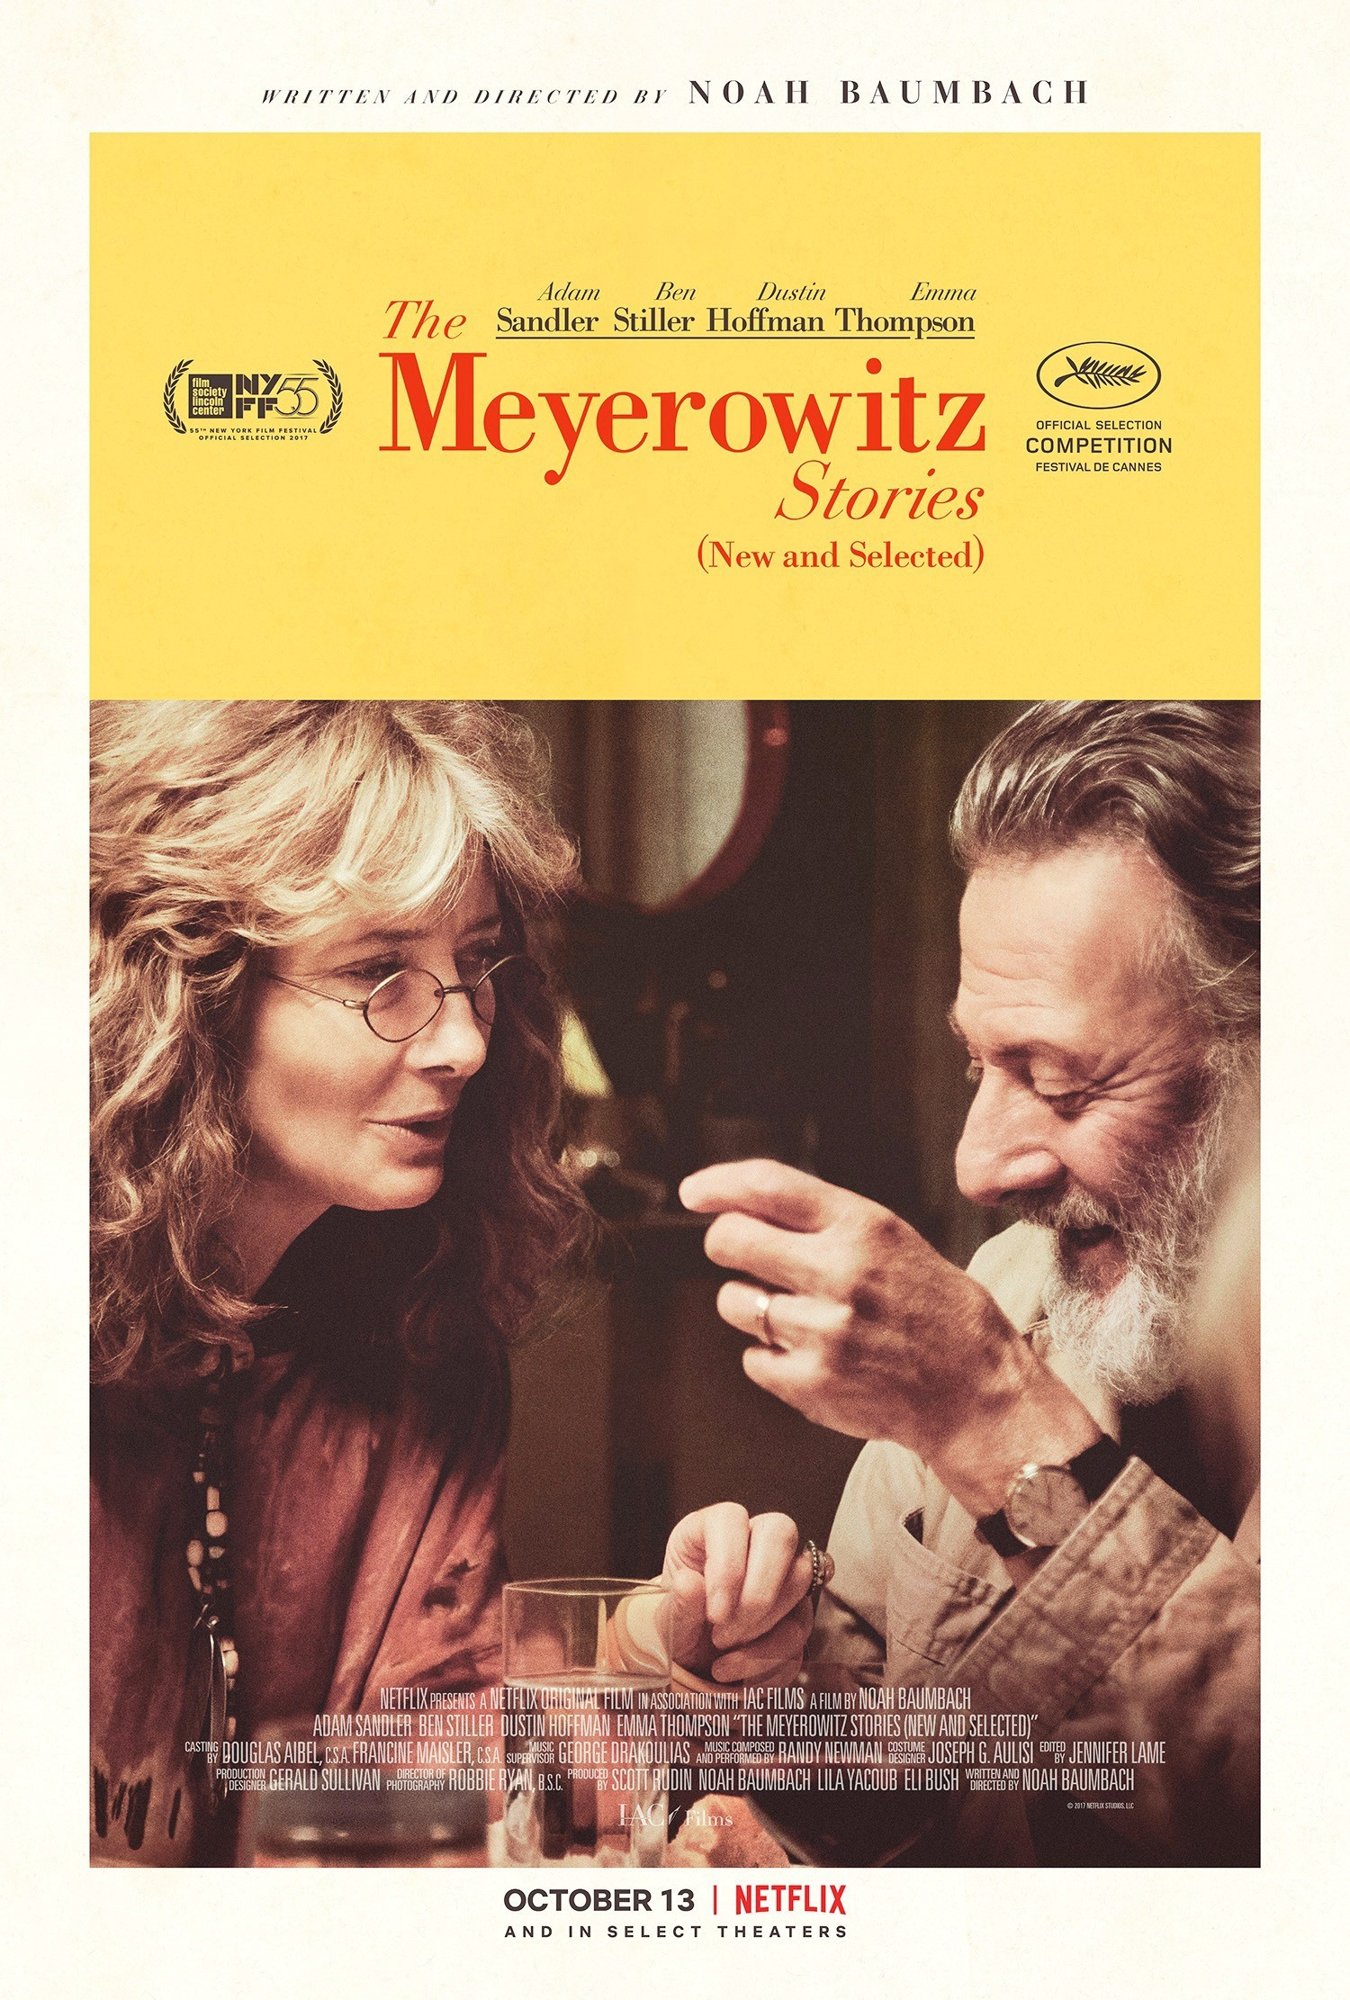 The Meyerowitz Stories (2017) Pictures, Trailer, Reviews, News, DVD and Soundtrack